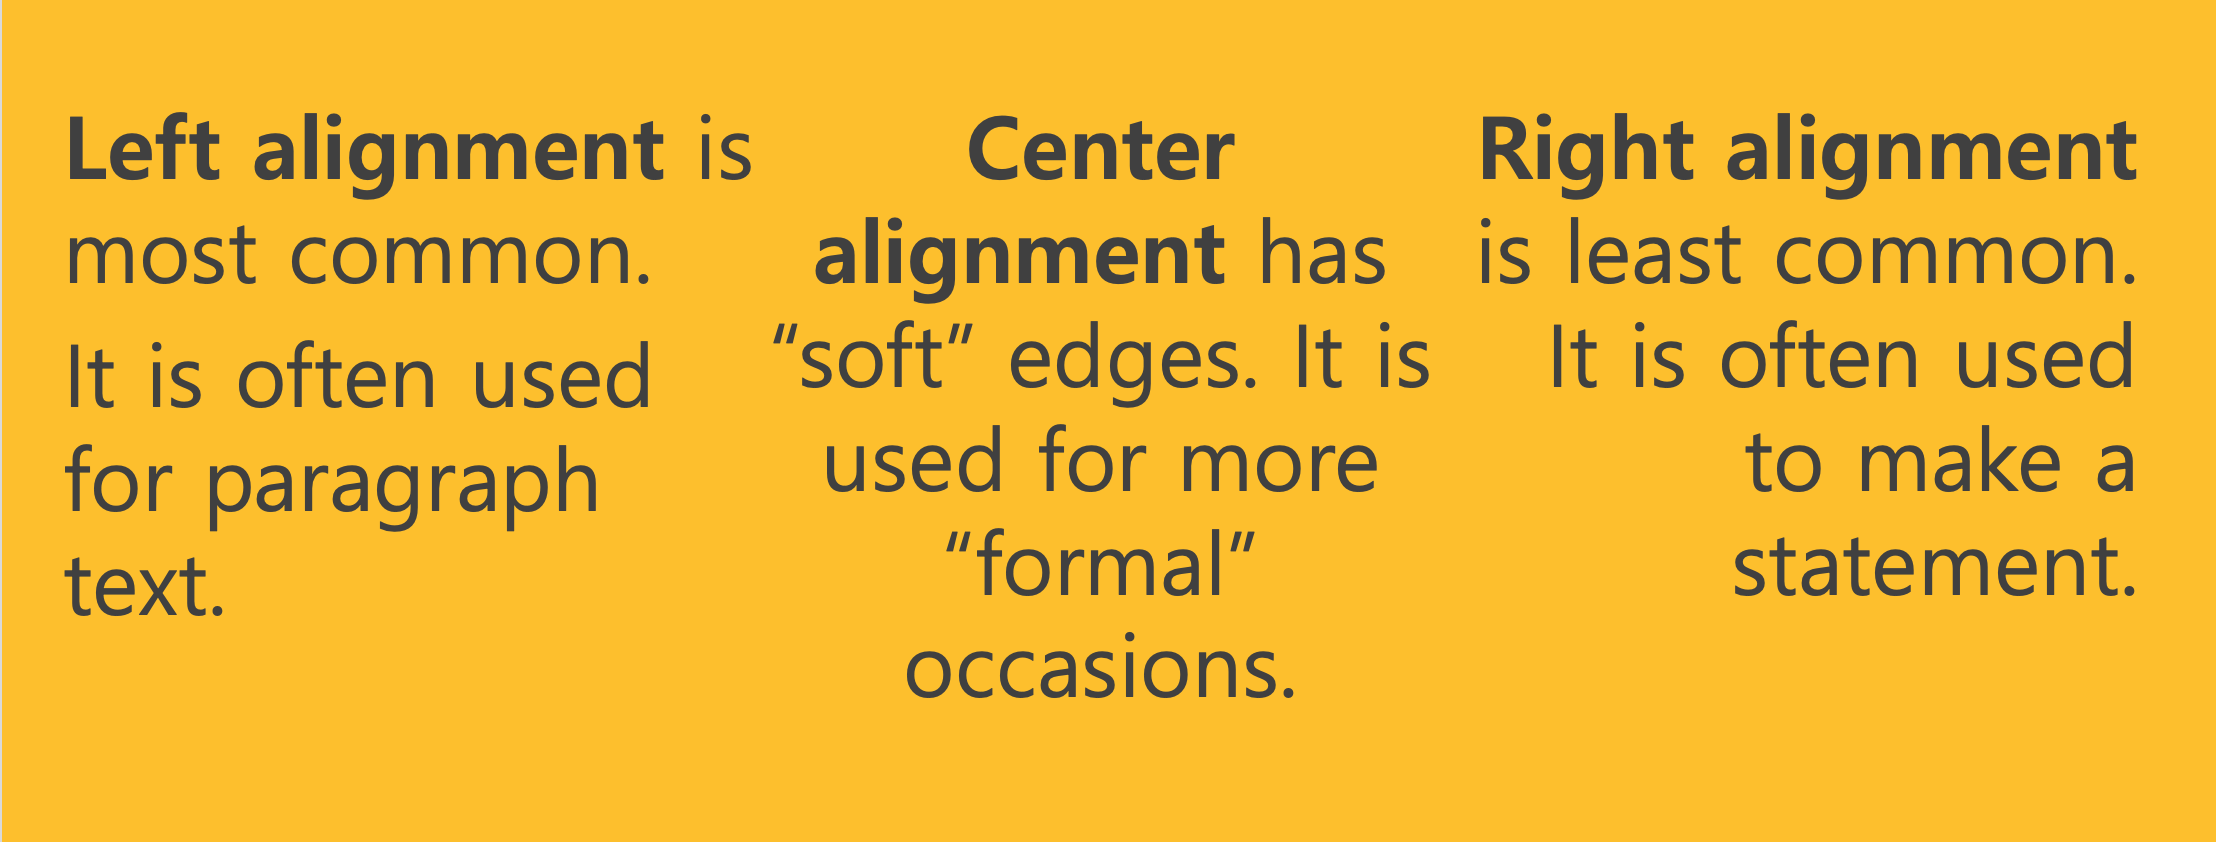 3 types of alignment